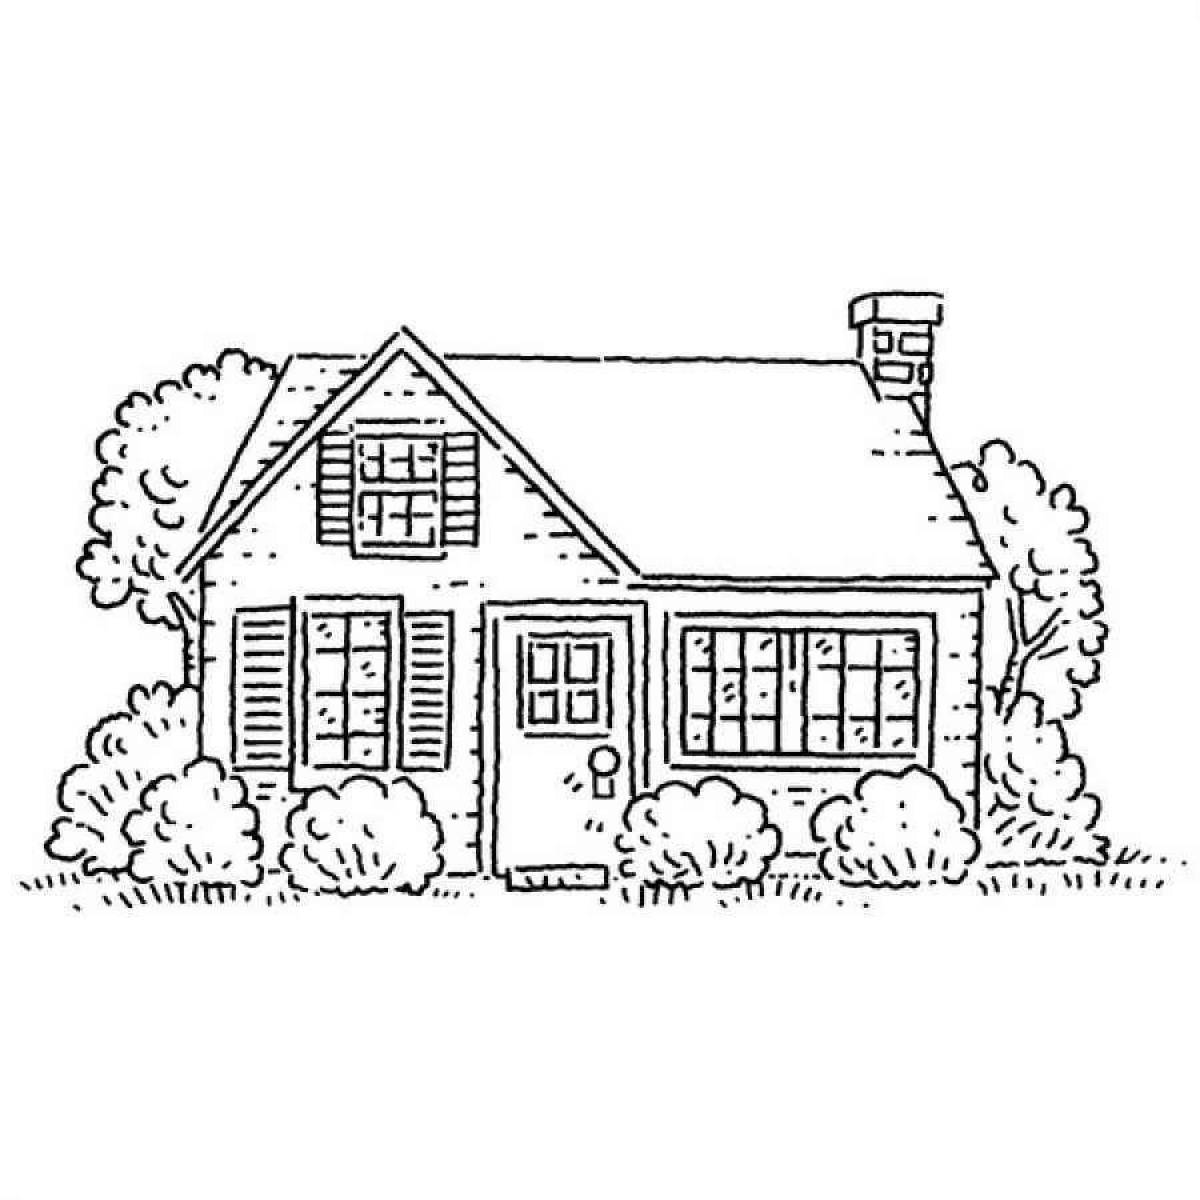 Coloring book for kids joyful country house